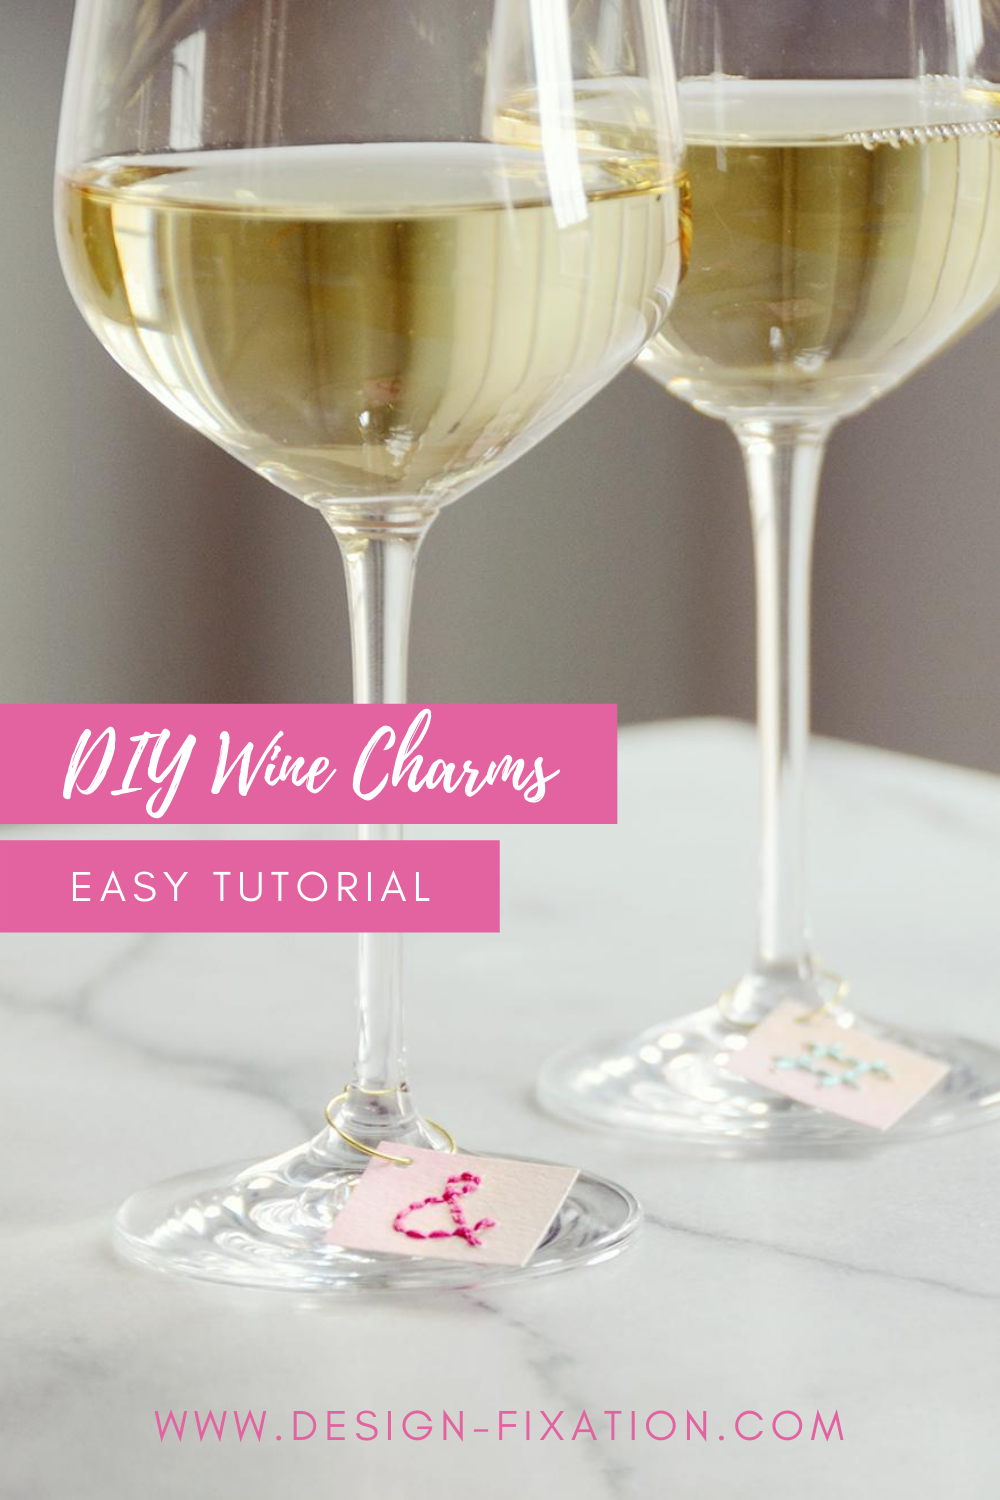 Stitched Paper DIY Wine Charms /// By Design Fixation #diy#wine #tutorial#stiching